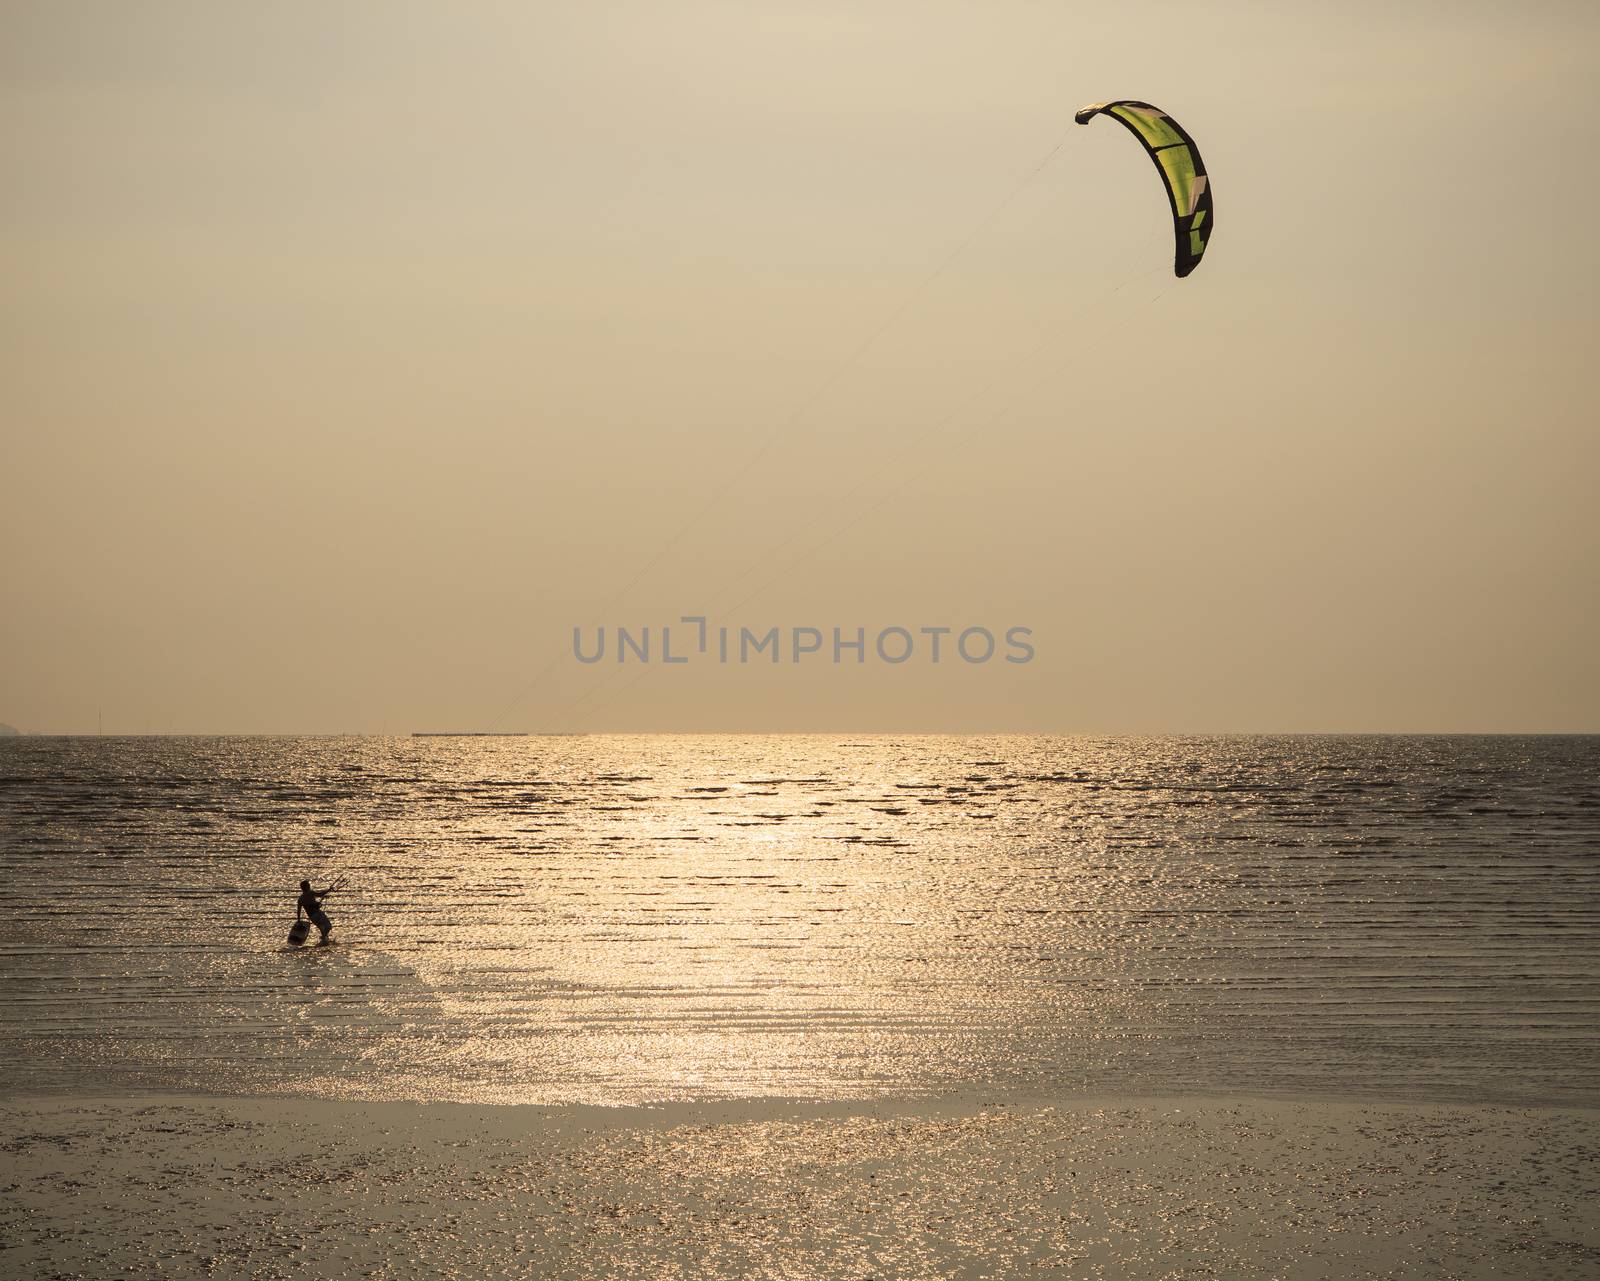 man with kite surving standing in sea water against evening sun  by khunaspix